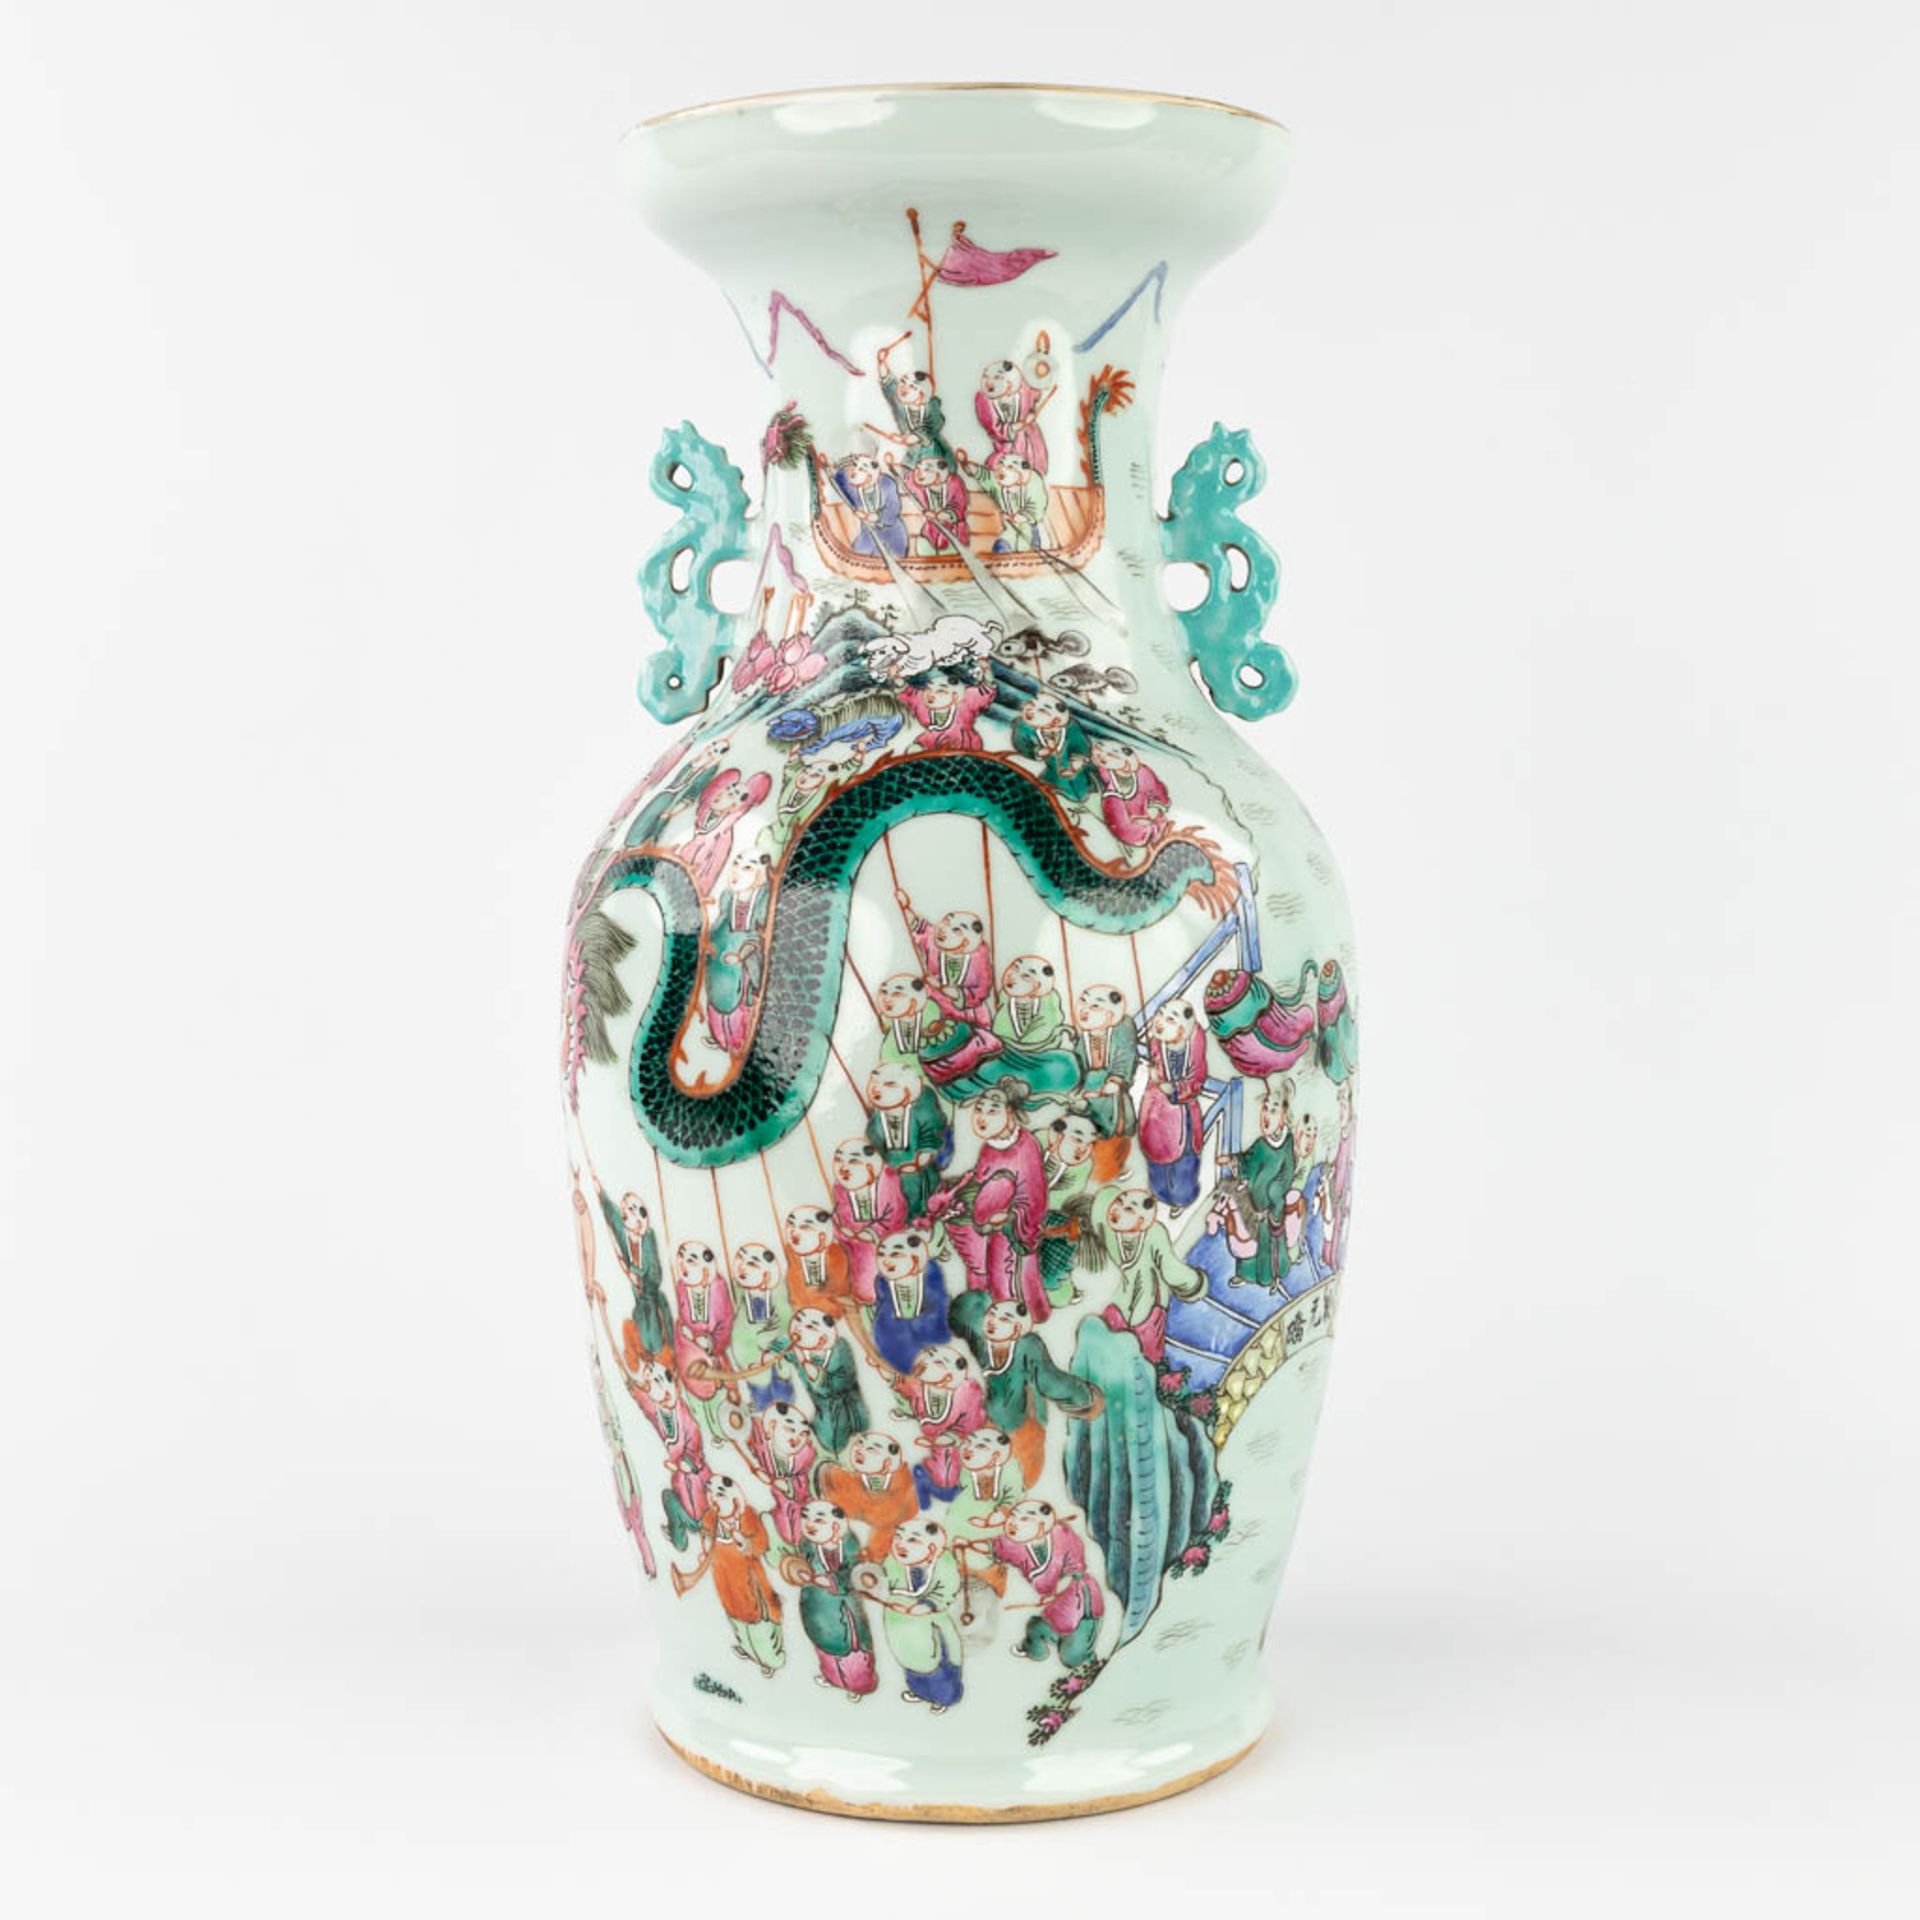 A Chinese Famille Rose '100 Boys' vase. 19th C. (H:44 x D:23 cm)